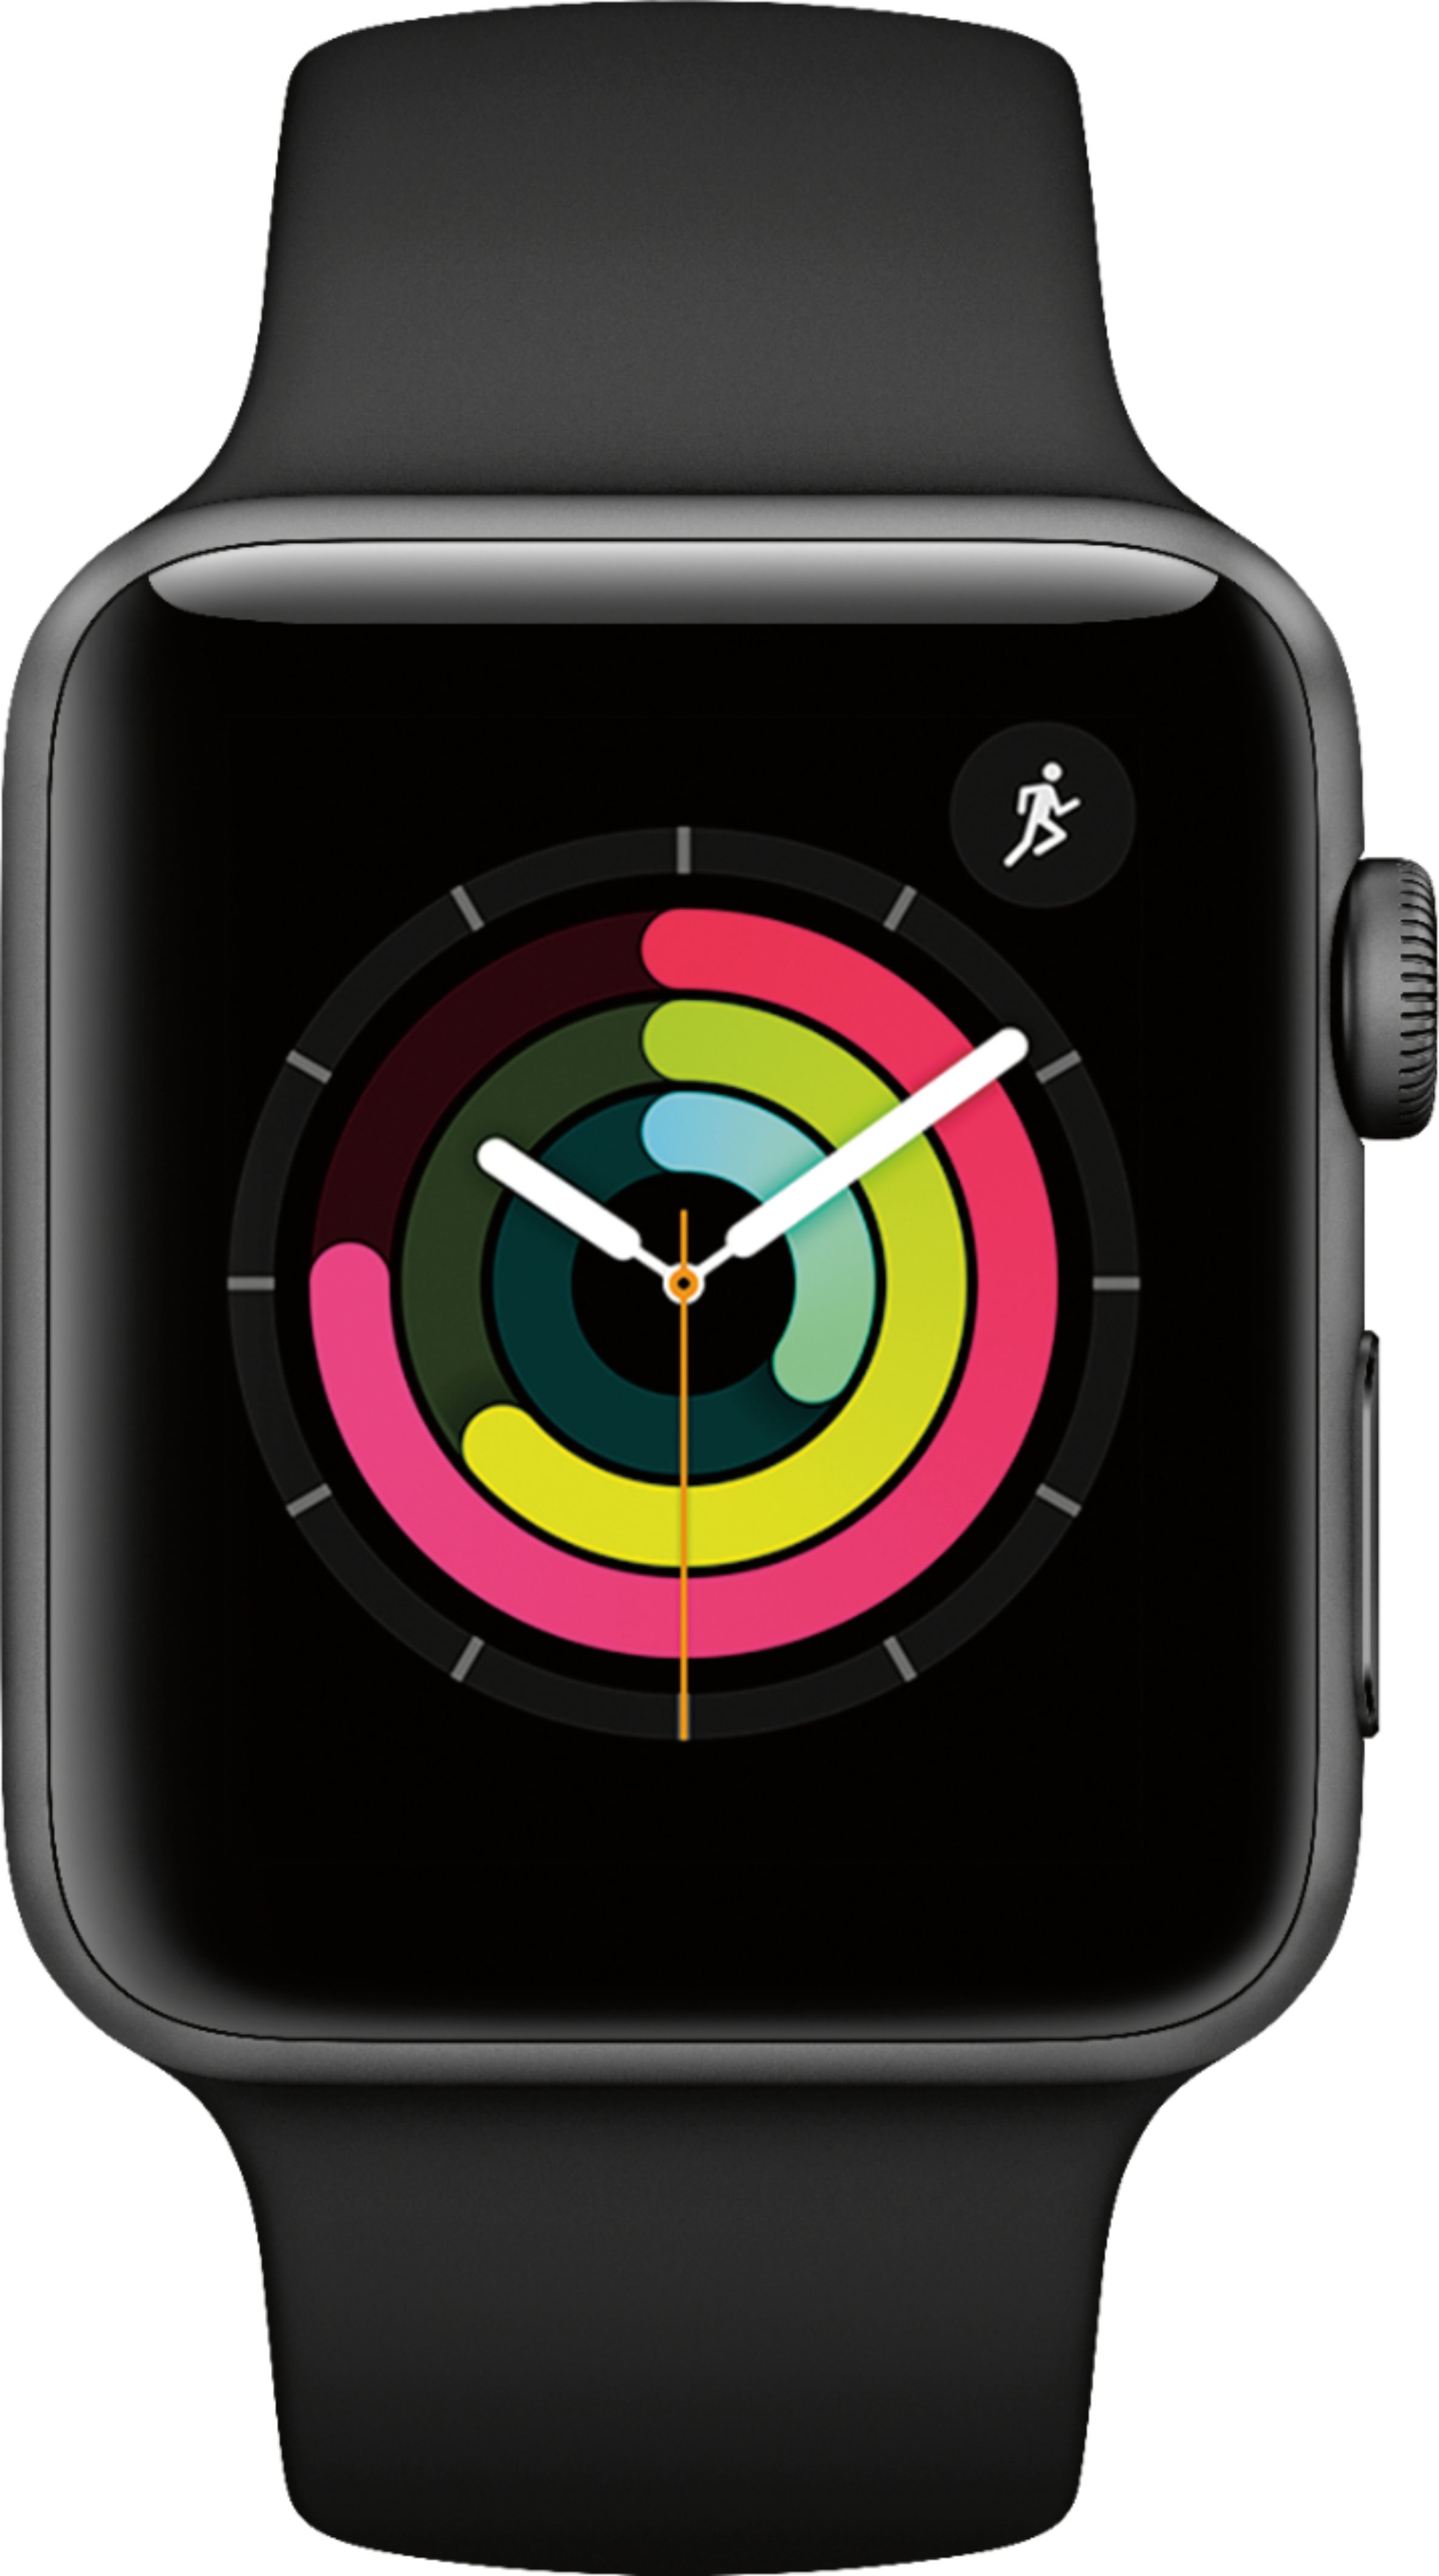 PC/タブレット PC周辺機器 Best Buy: Apple Watch Series 3 (GPS) 42mm Aluminum Case with Black 